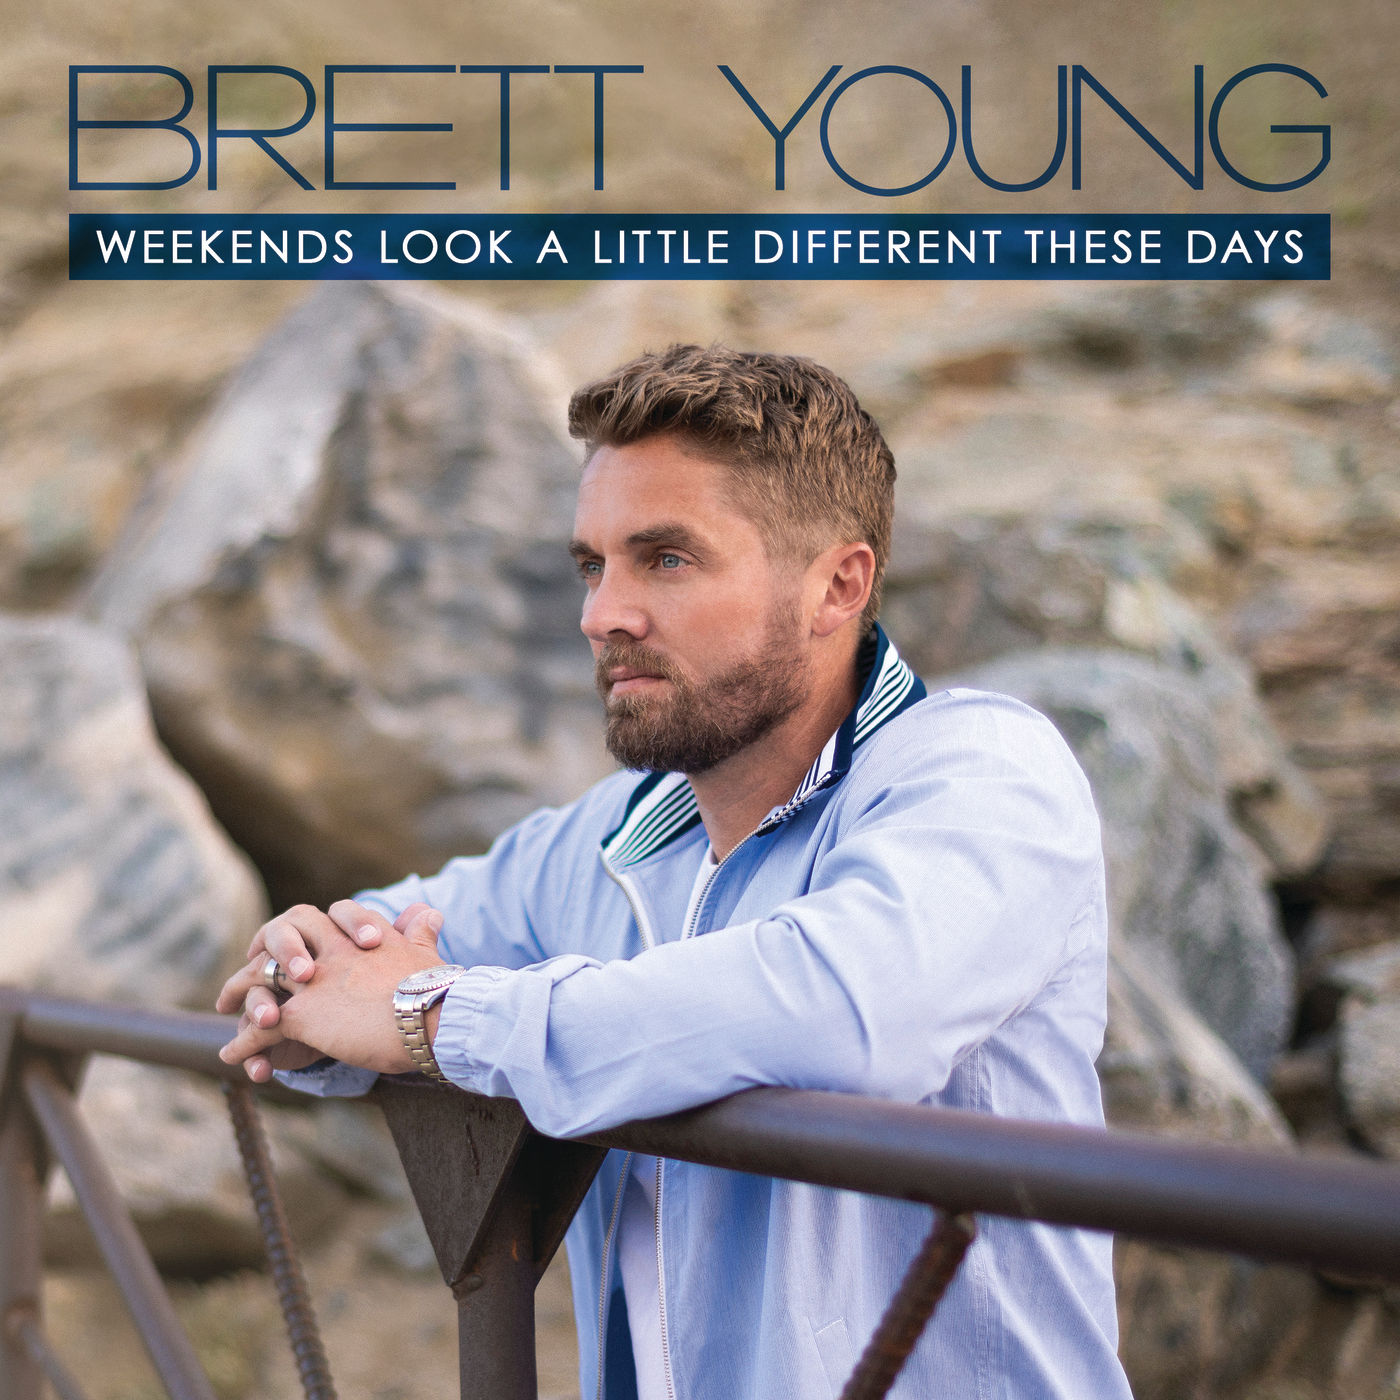 Brett Young - Weekends Look A Little Different These Days (2021) [FLAC 24bit/48kHz]